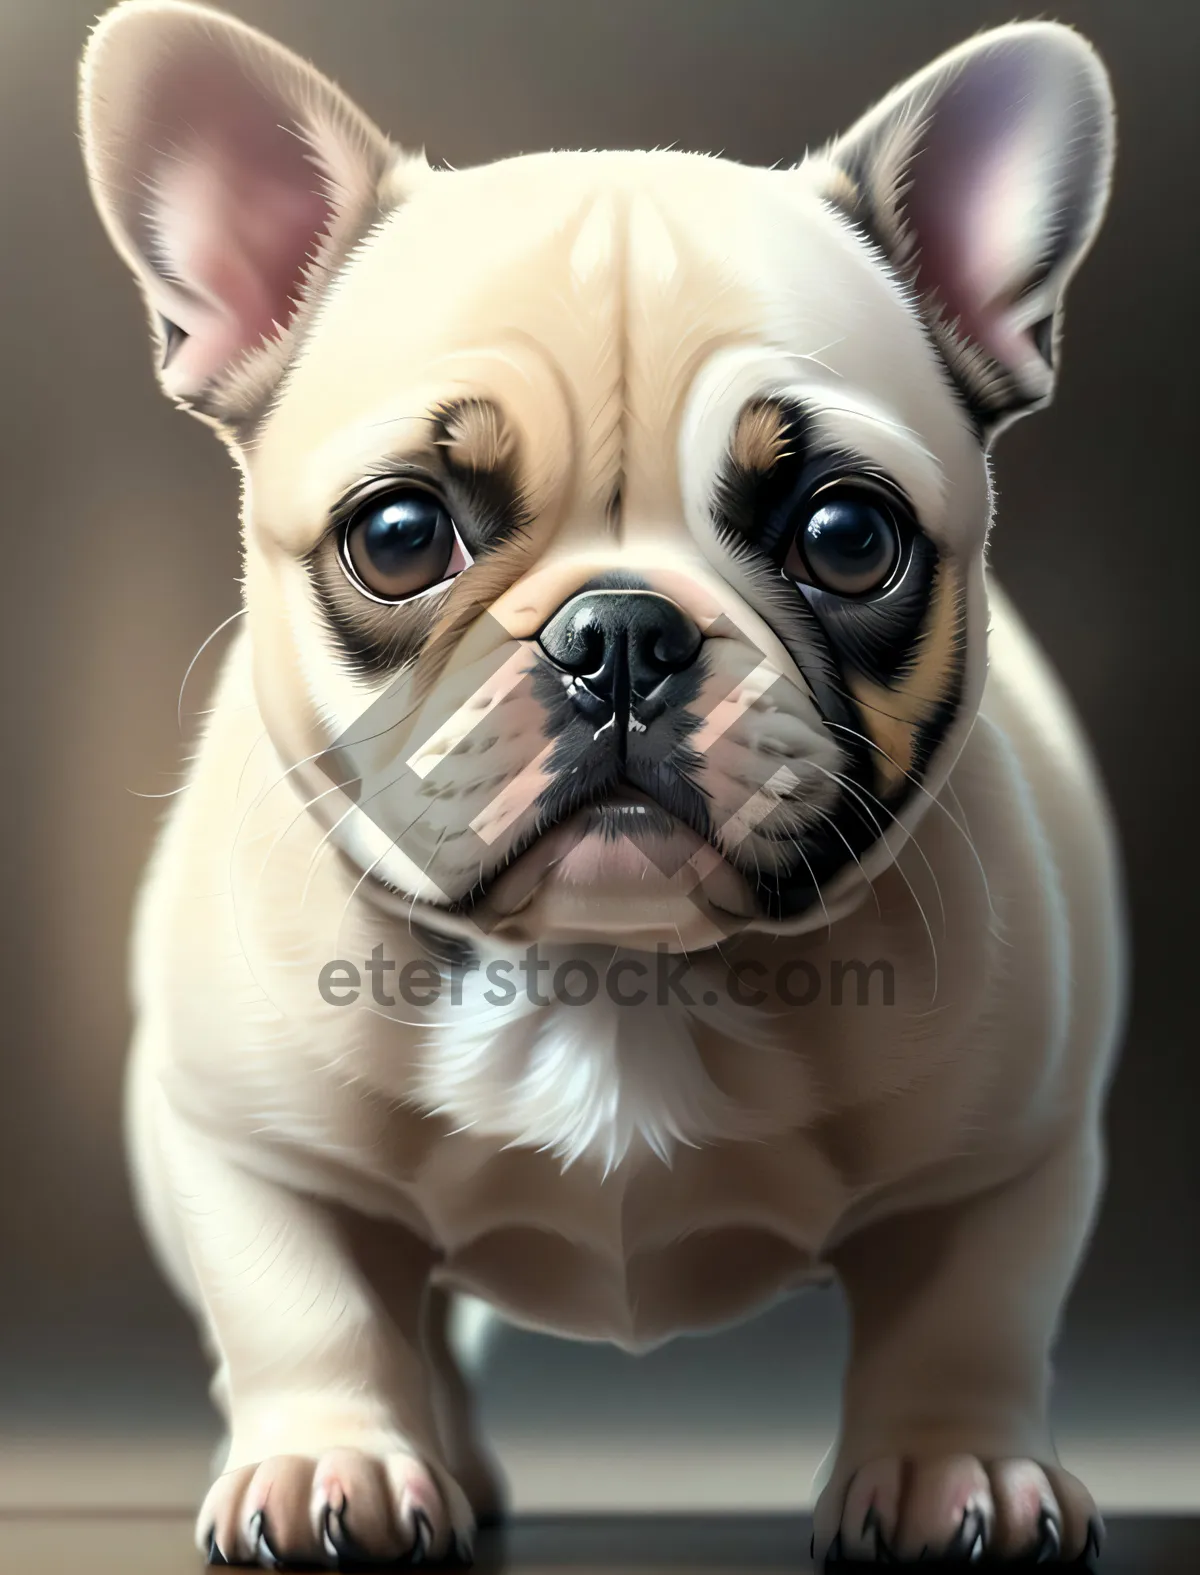 Picture of Lovable and wrinkled bulldog puppy becomes the epitome of adorableness, making for an enchanting canine companion